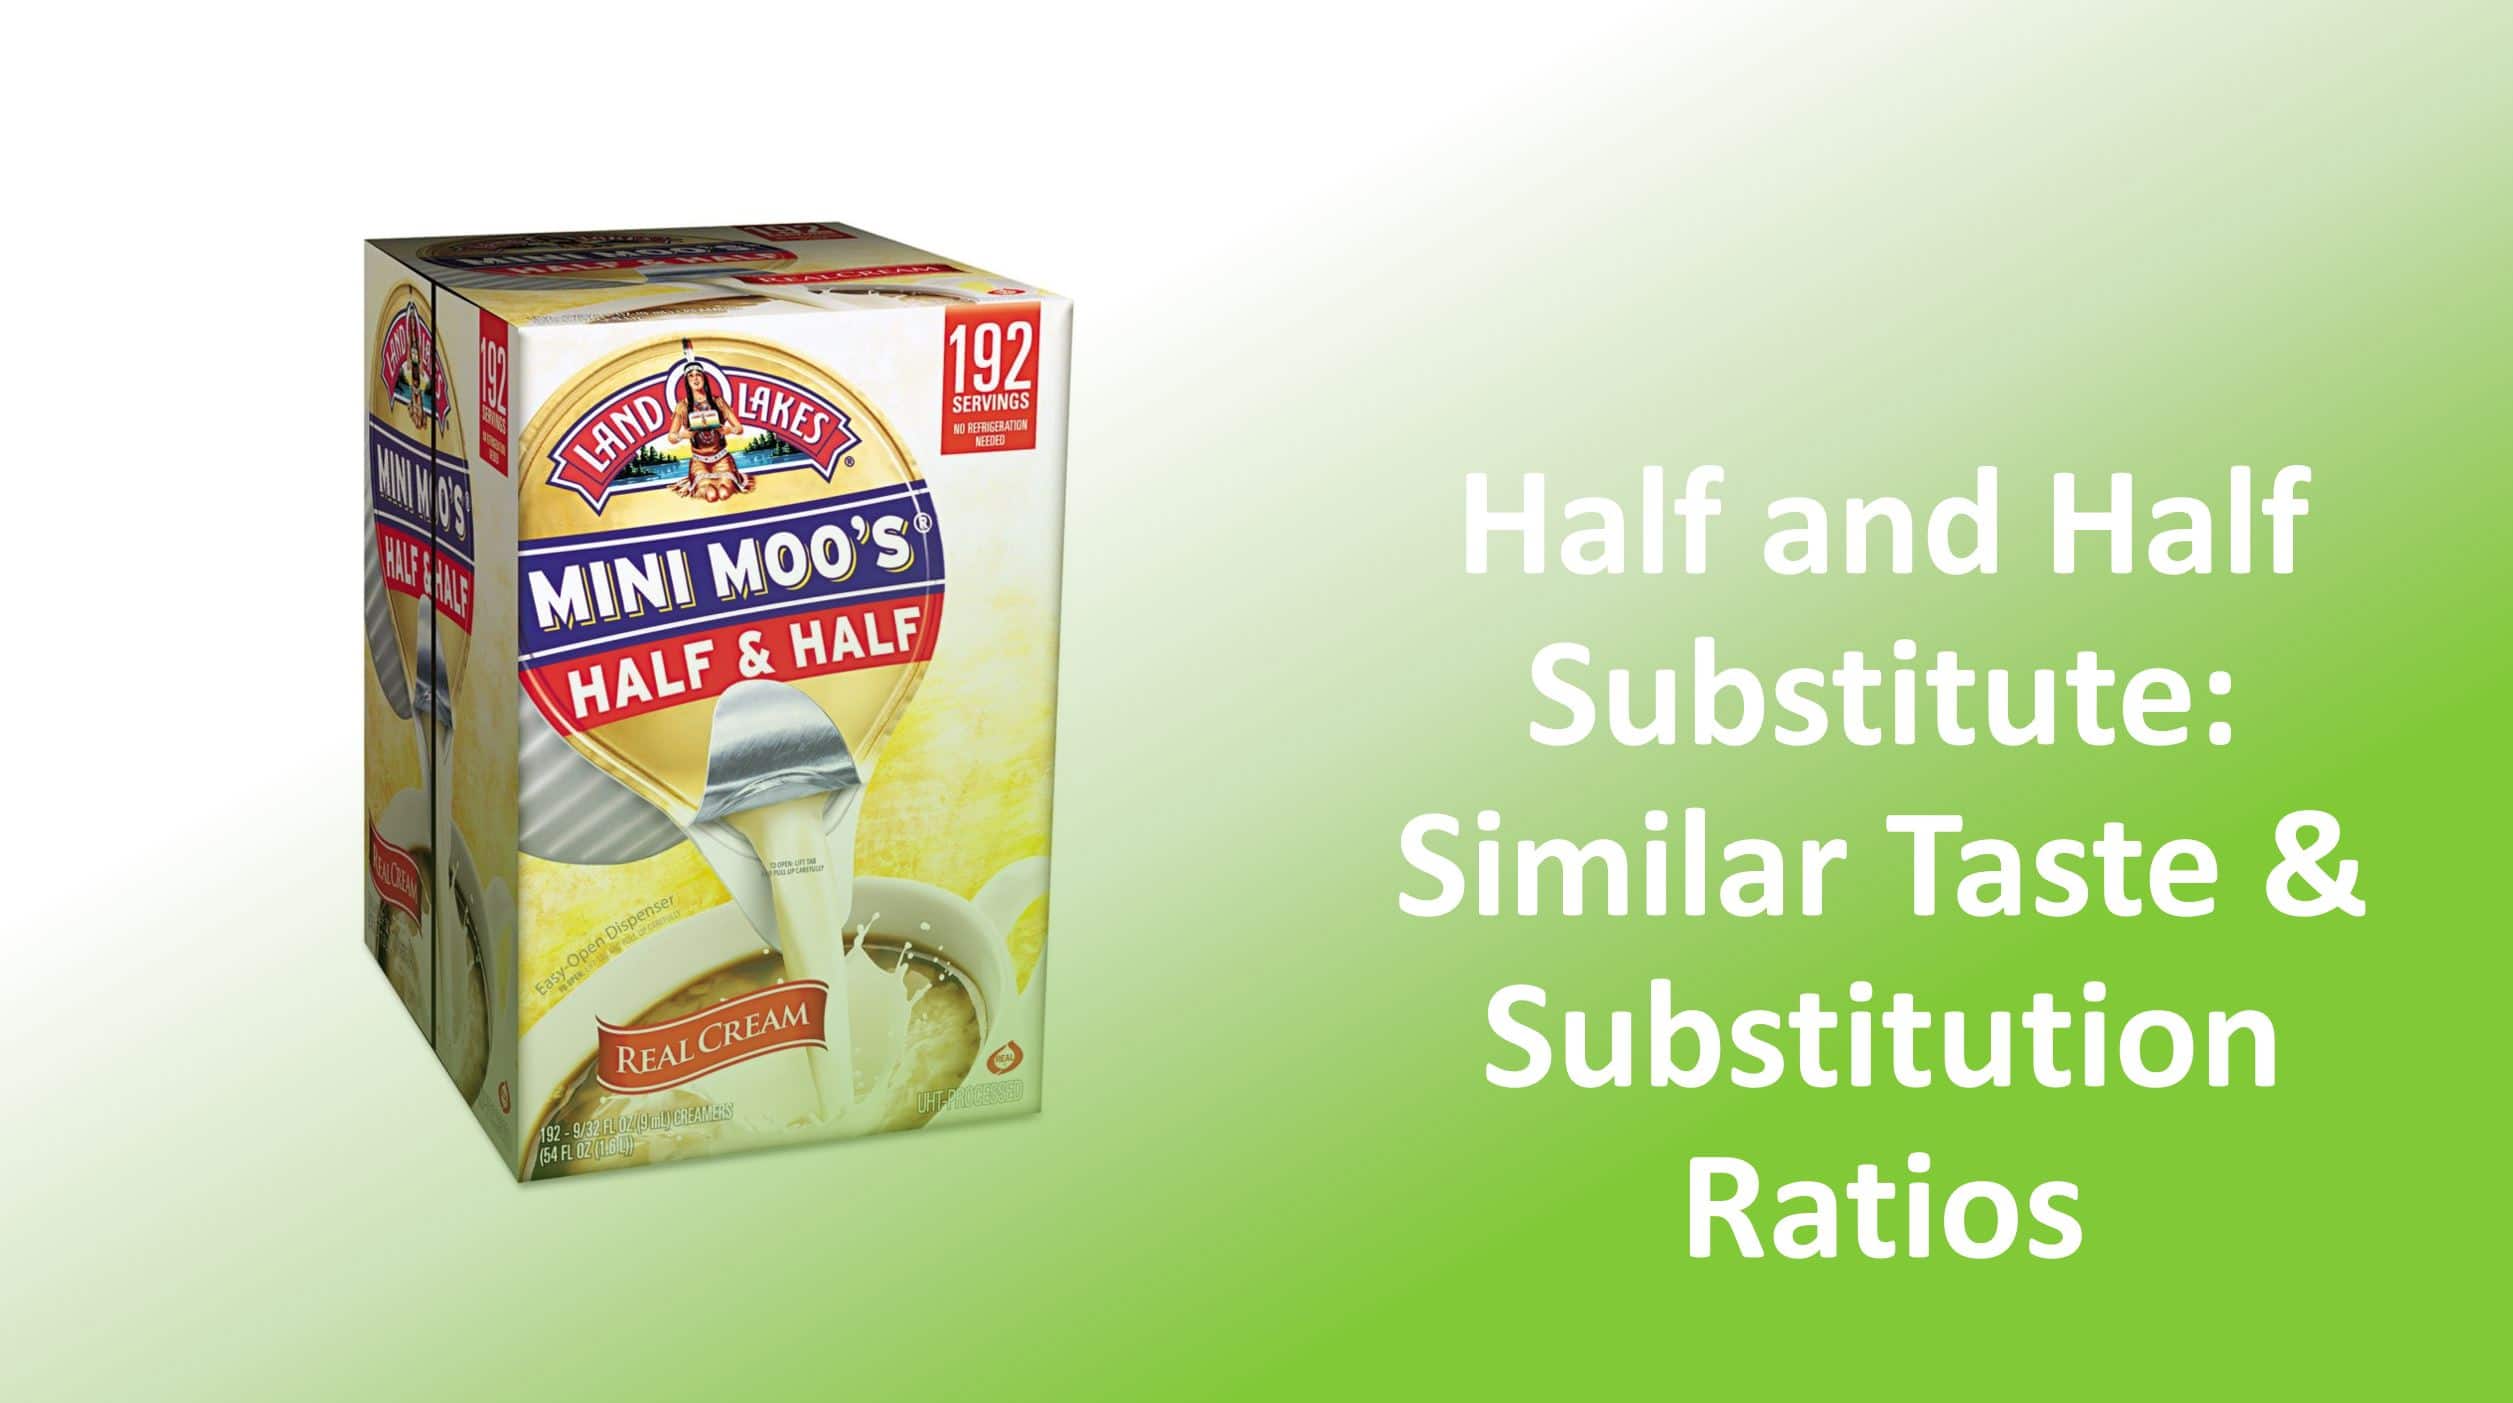 https://www.foodchamps.org/wp-content/uploads/2022/03/half-and-half-substitute-similar-taste-and-substitution-ratios.jpg